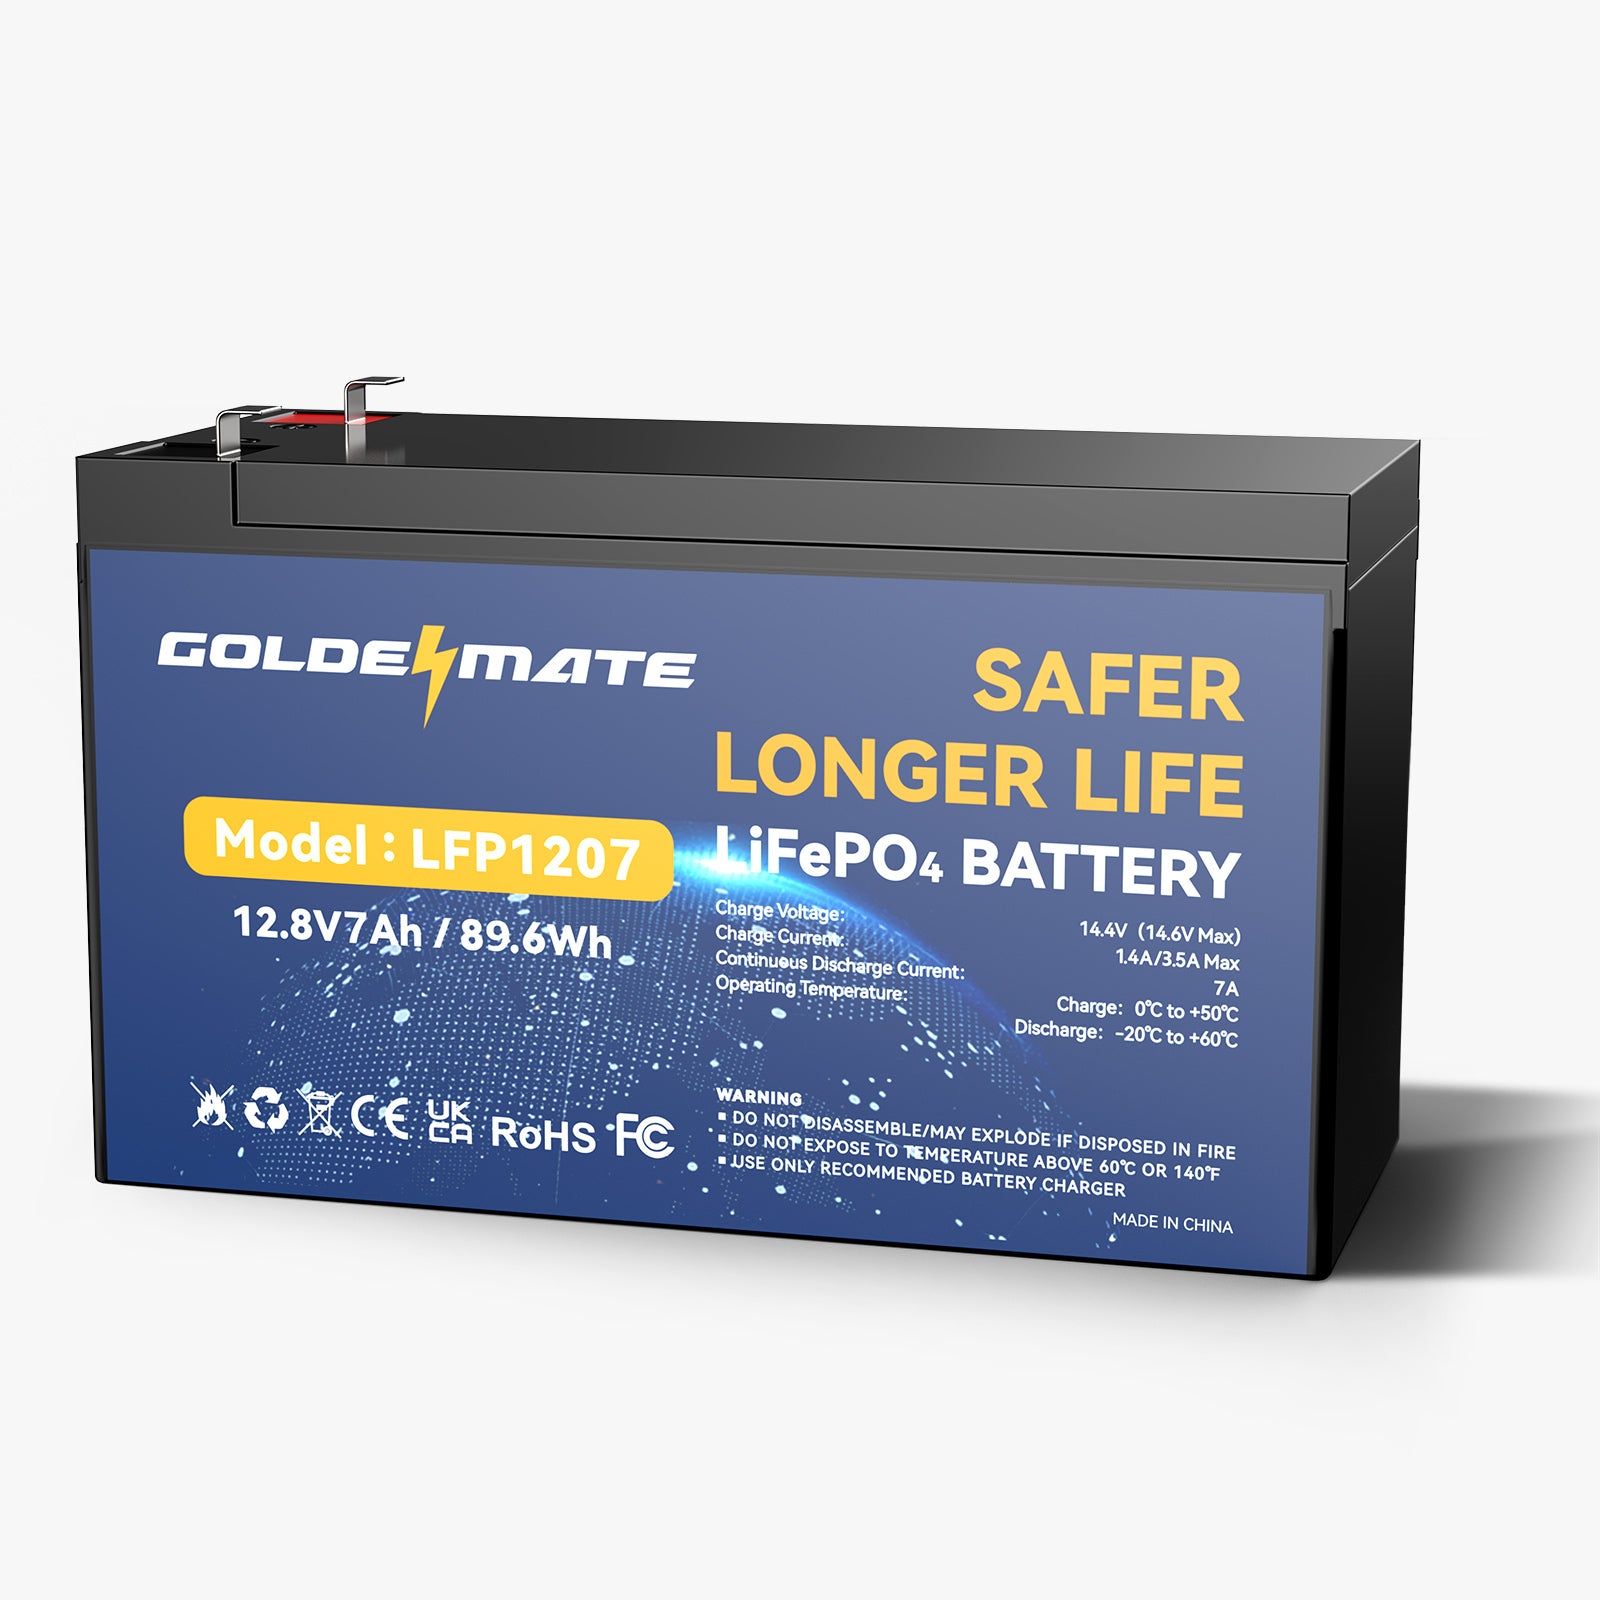 GoldenMate 12V 7Ah LiFePO4 Lithium Battery, 89.6Wh Output Power, Built-in BMS